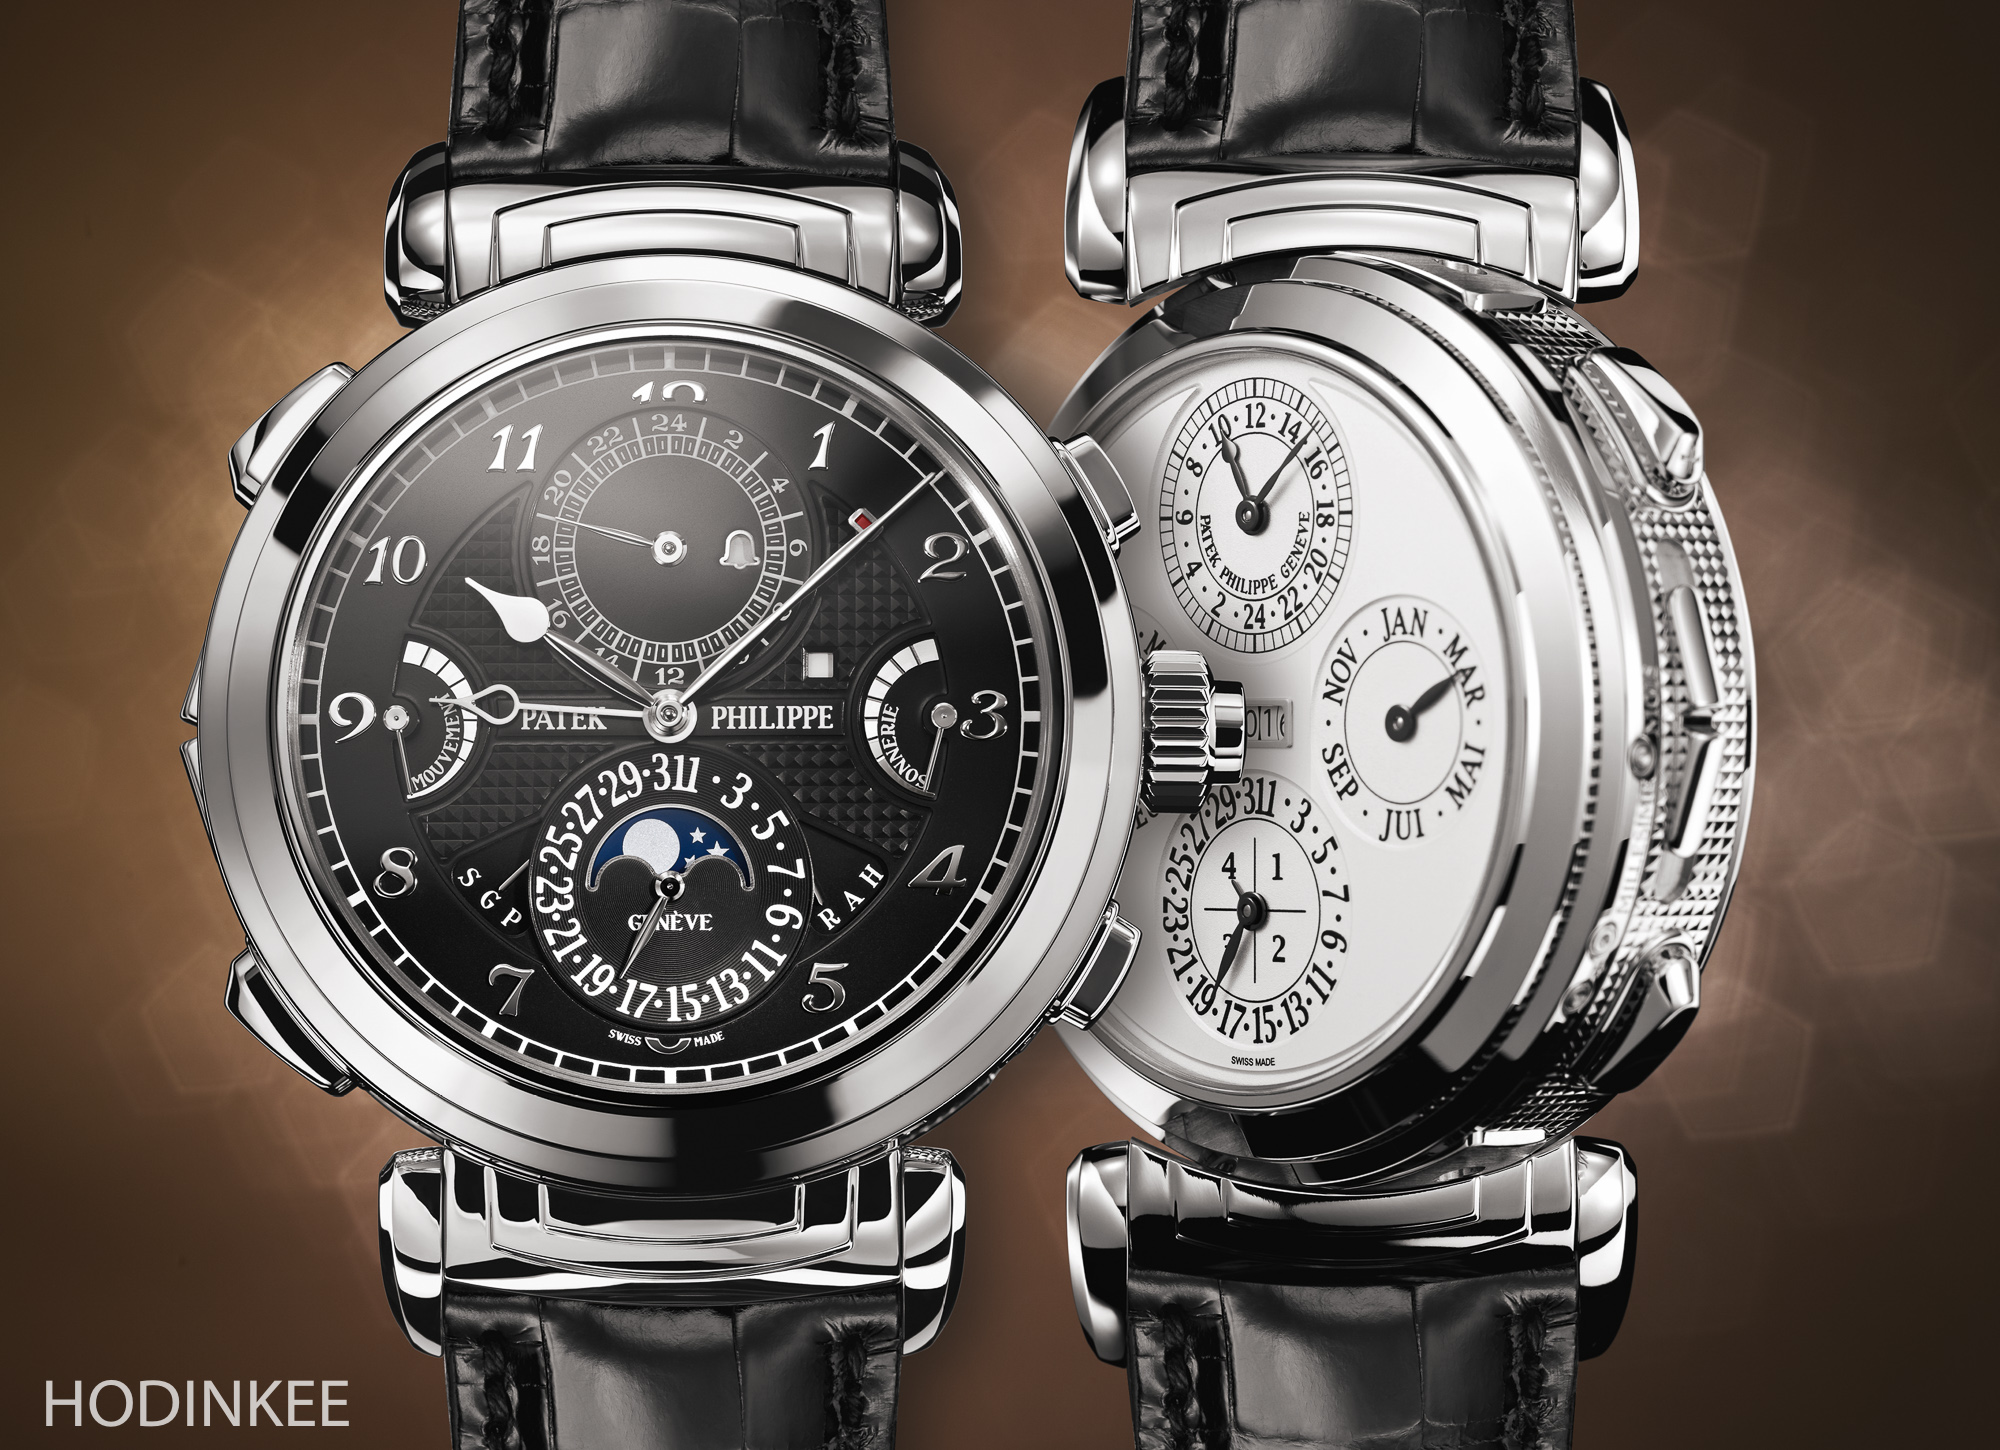 Introducing: The Grandmaster Chime Reference 6300G – The Most 